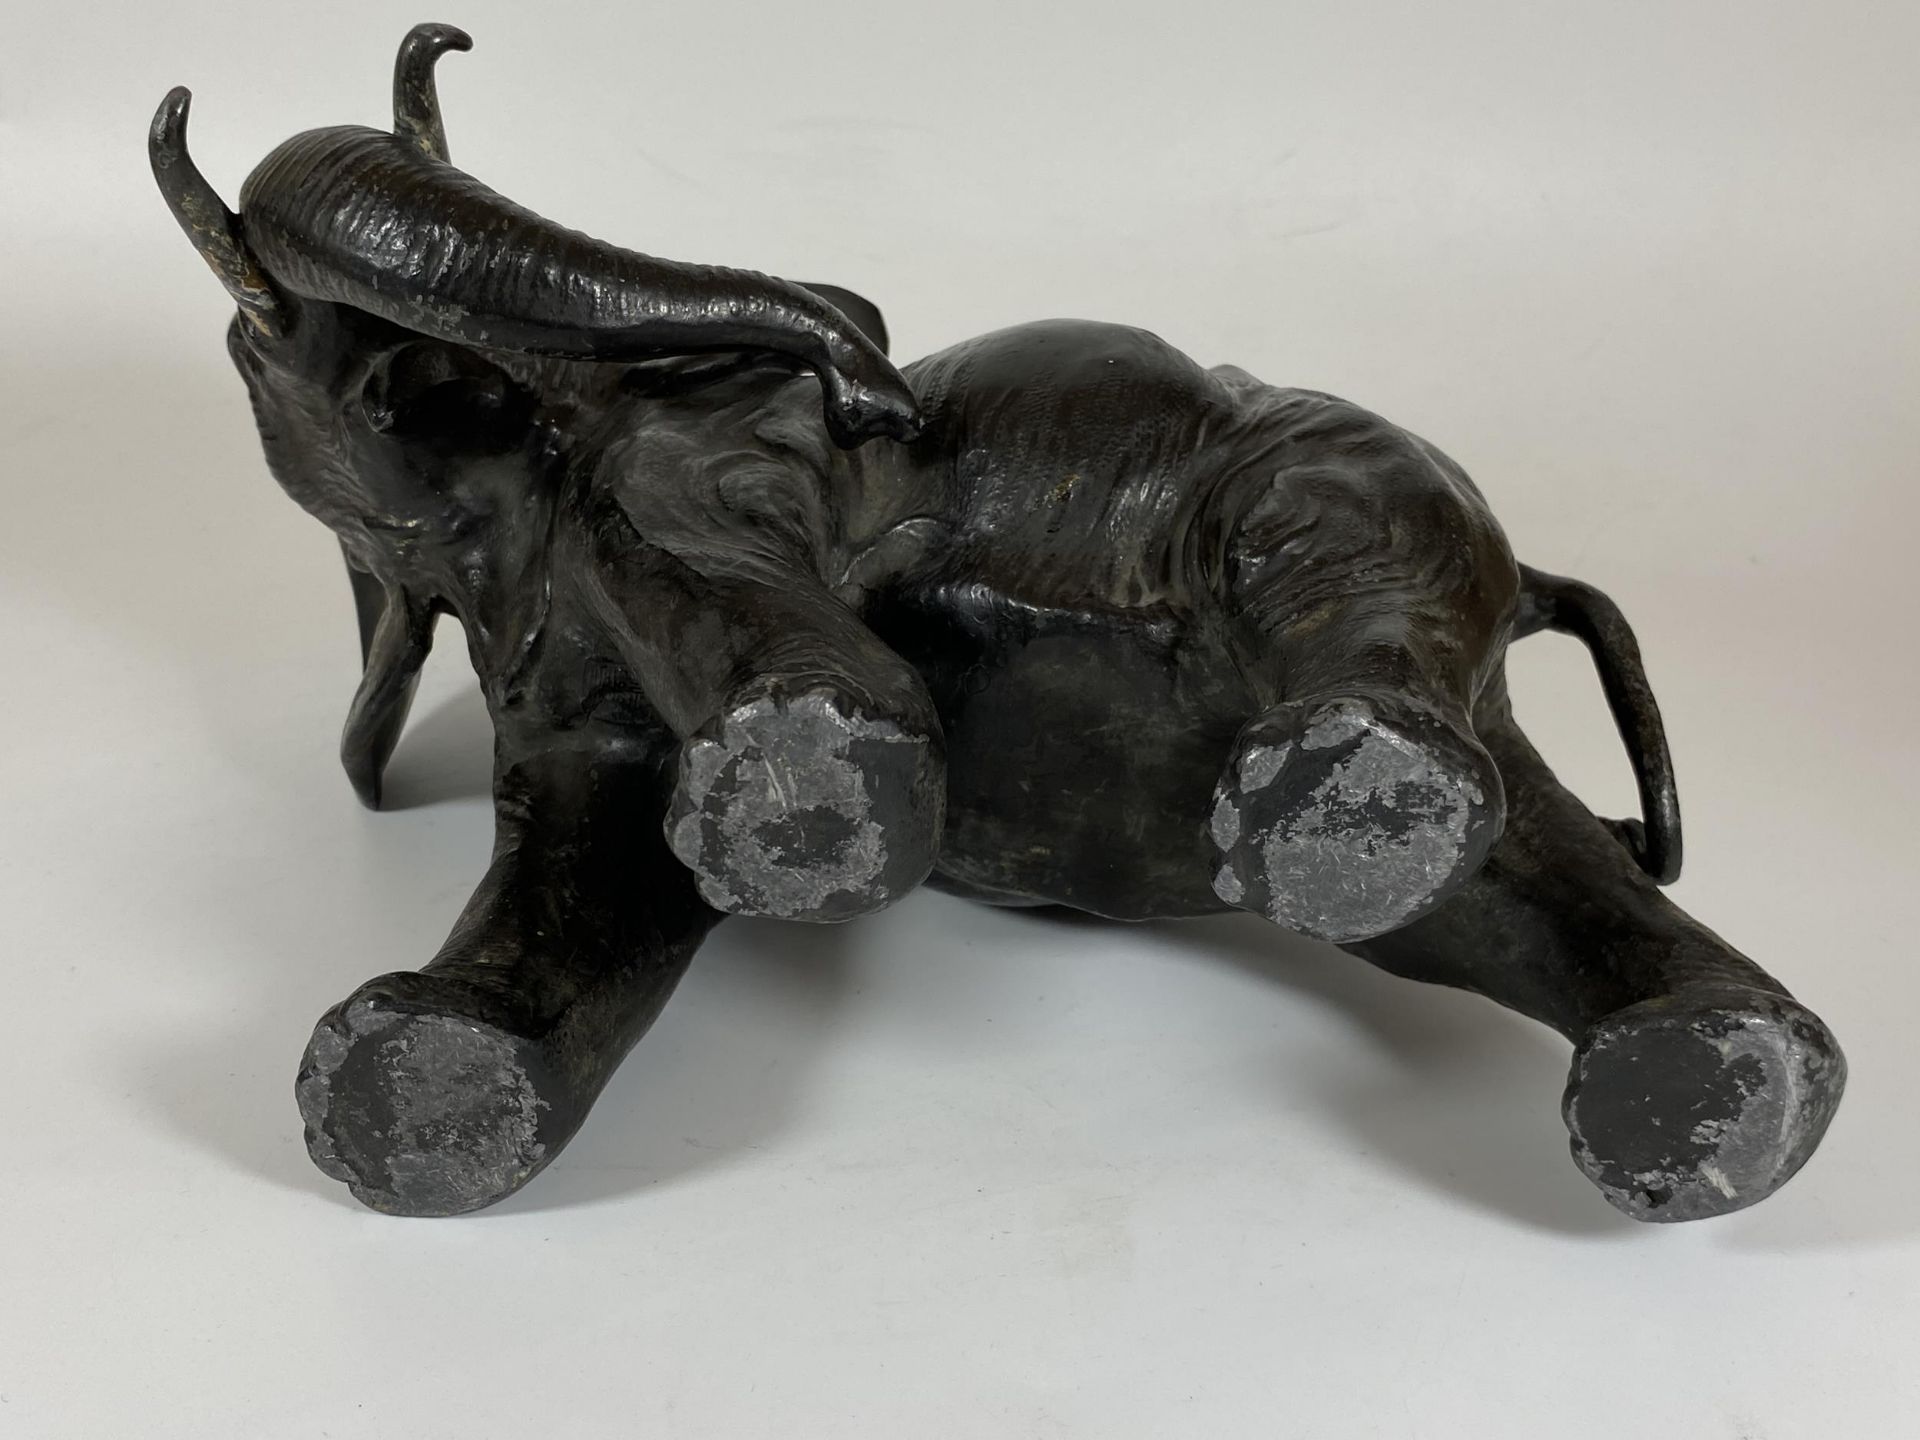 A JAPANESE MEIJI PERIOD (1868-1912) SPELTER MODEL OF AN ELEPHANT, HEIGHT 21CM - Image 6 of 7